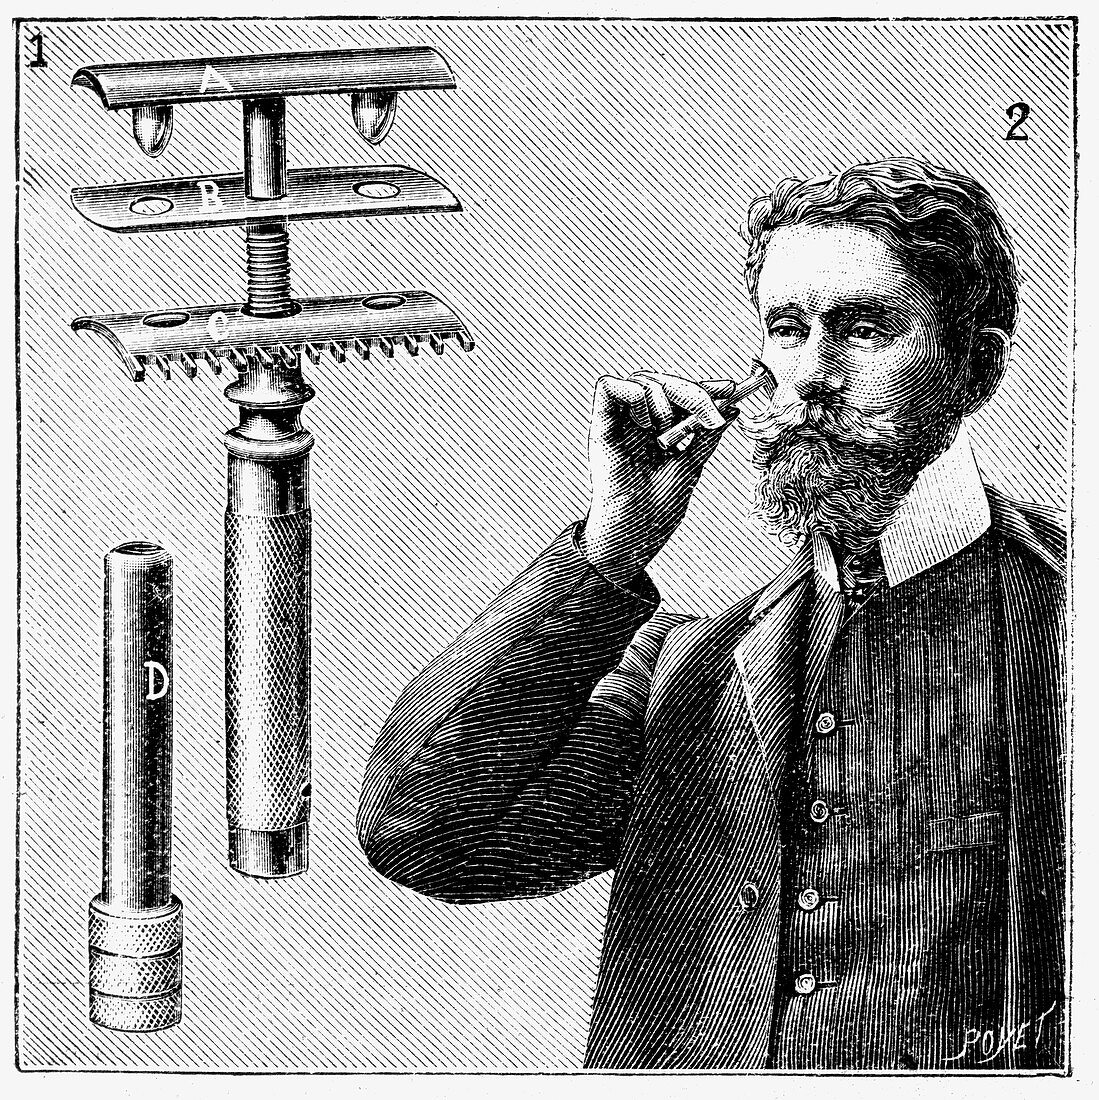 King Gillette's safety razor with replaceable blade, 1905